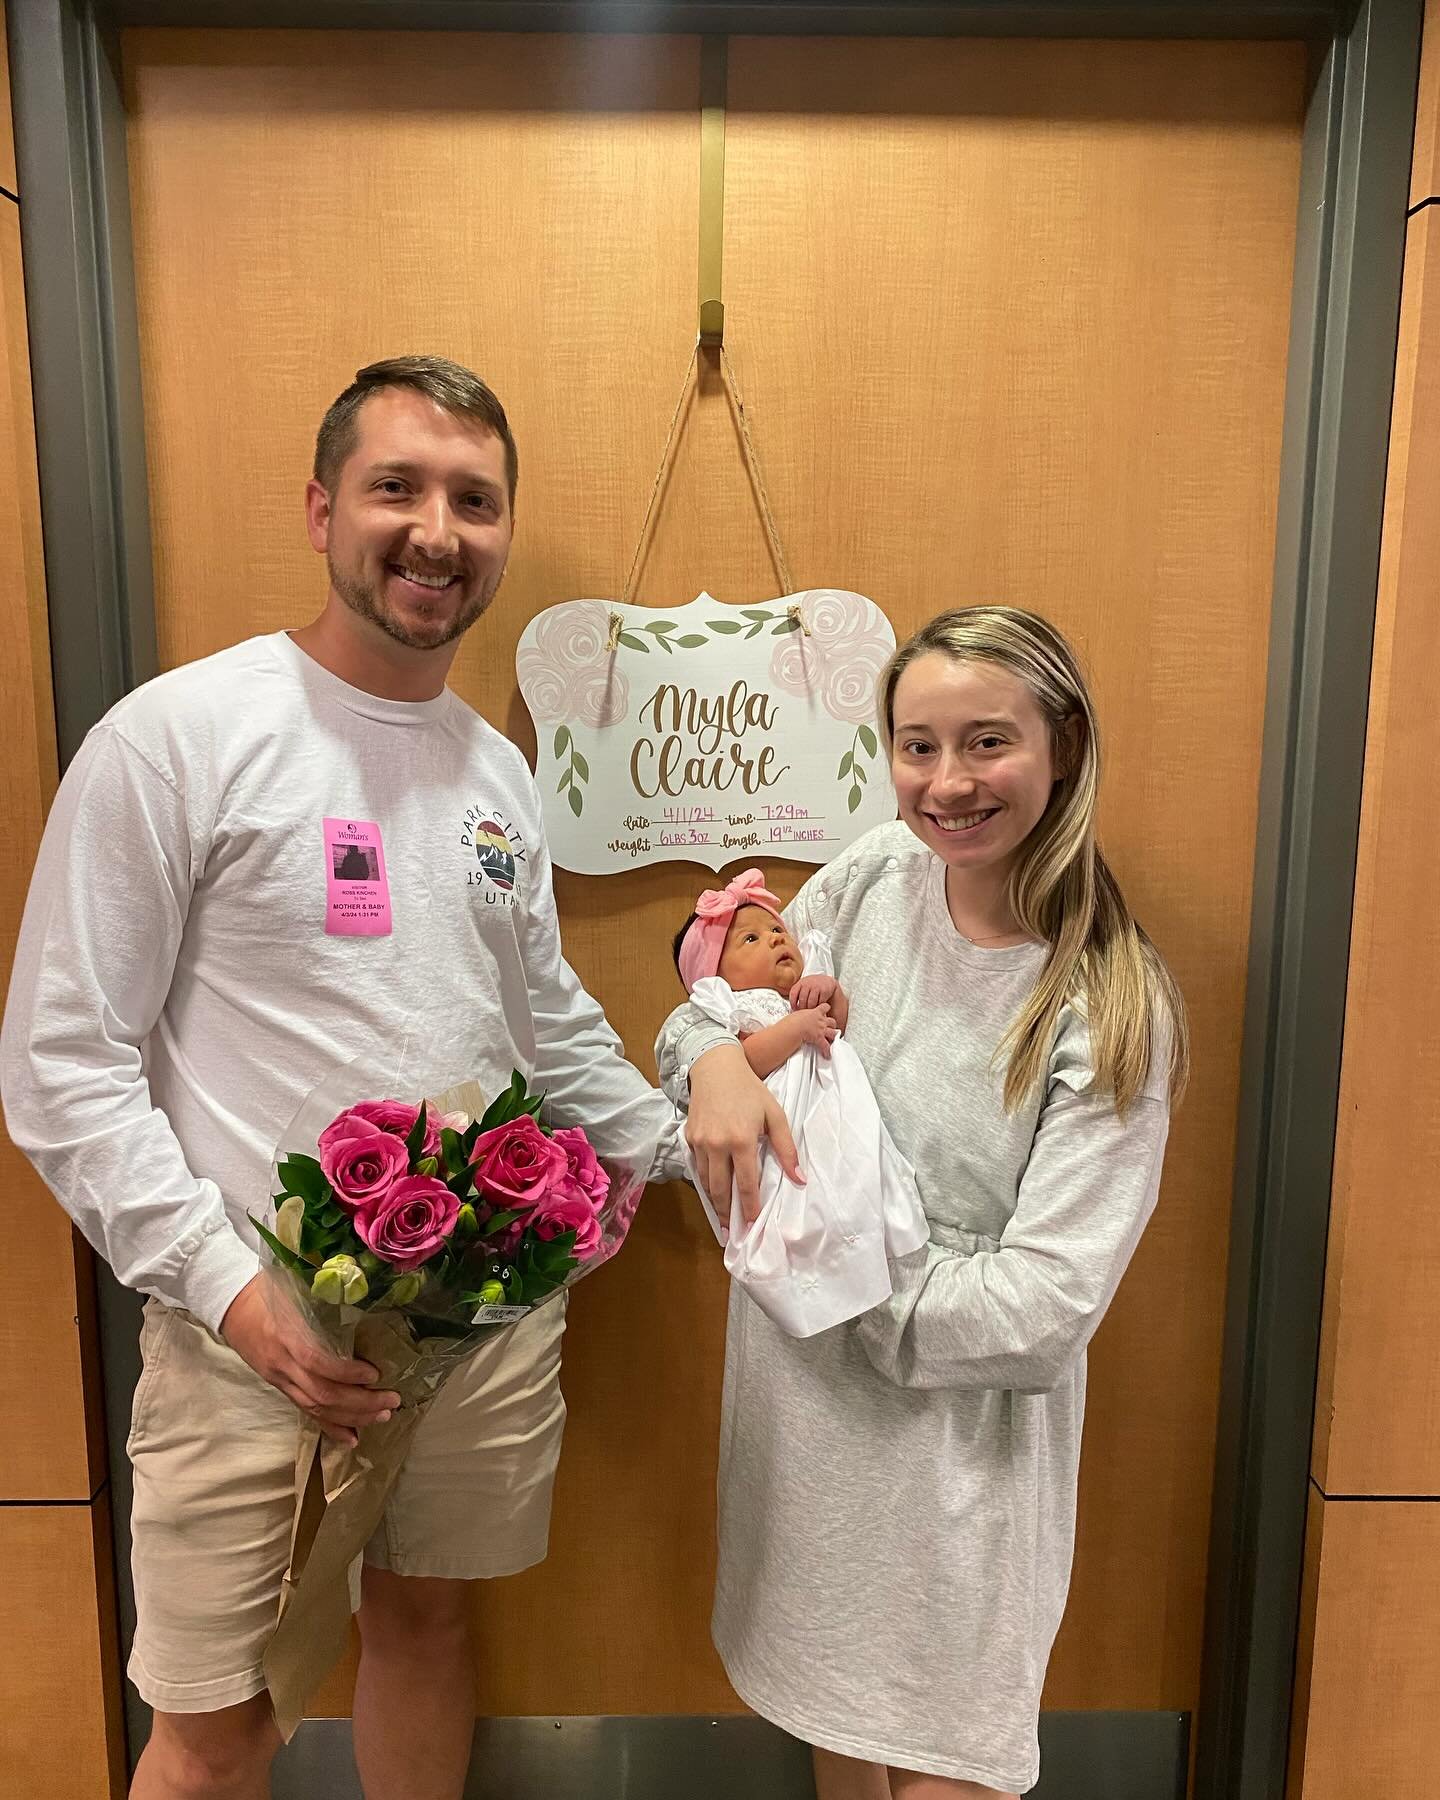 We are soooo excited ✨ to share the newest addition to the First Glimpse family made her arrival on April 1st🩷! 
Yall help us congratulate Emiley &amp; Ross on their beautiful addition! Emiley will be enjoying some much deserved time with sweet Myla